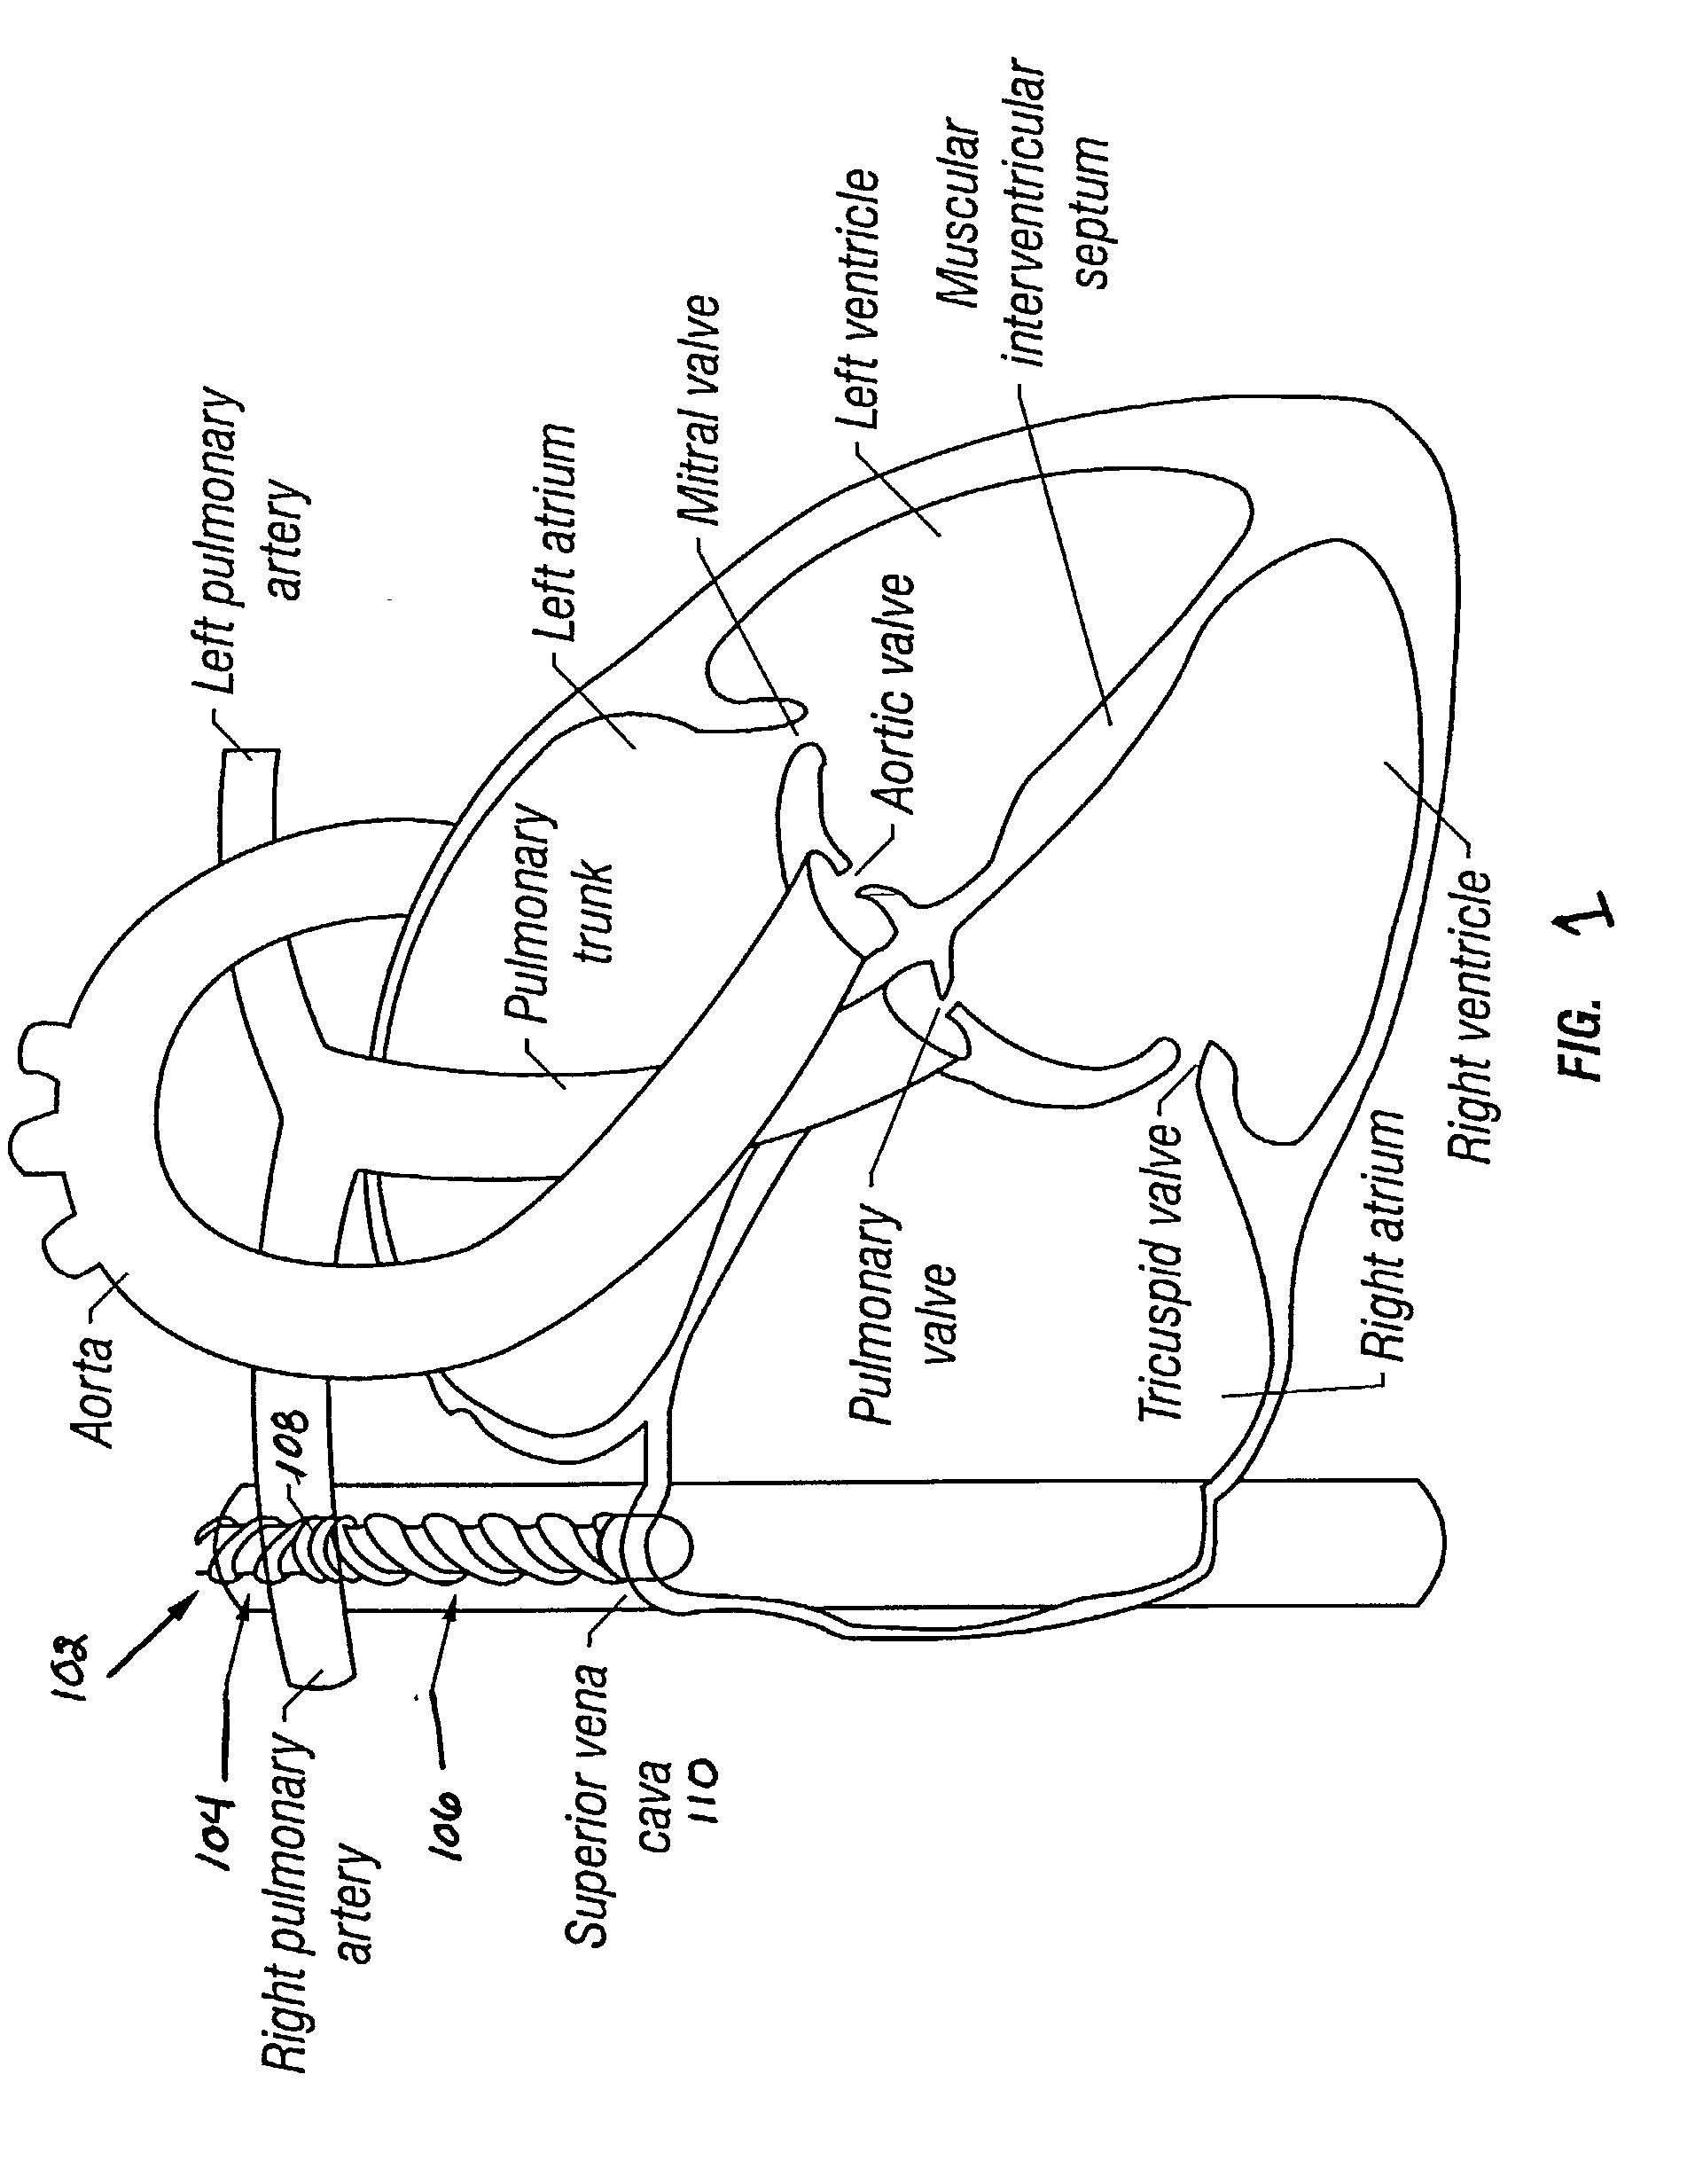 Method and apparatus for patient temperature control employing administration of anti-shivering agents